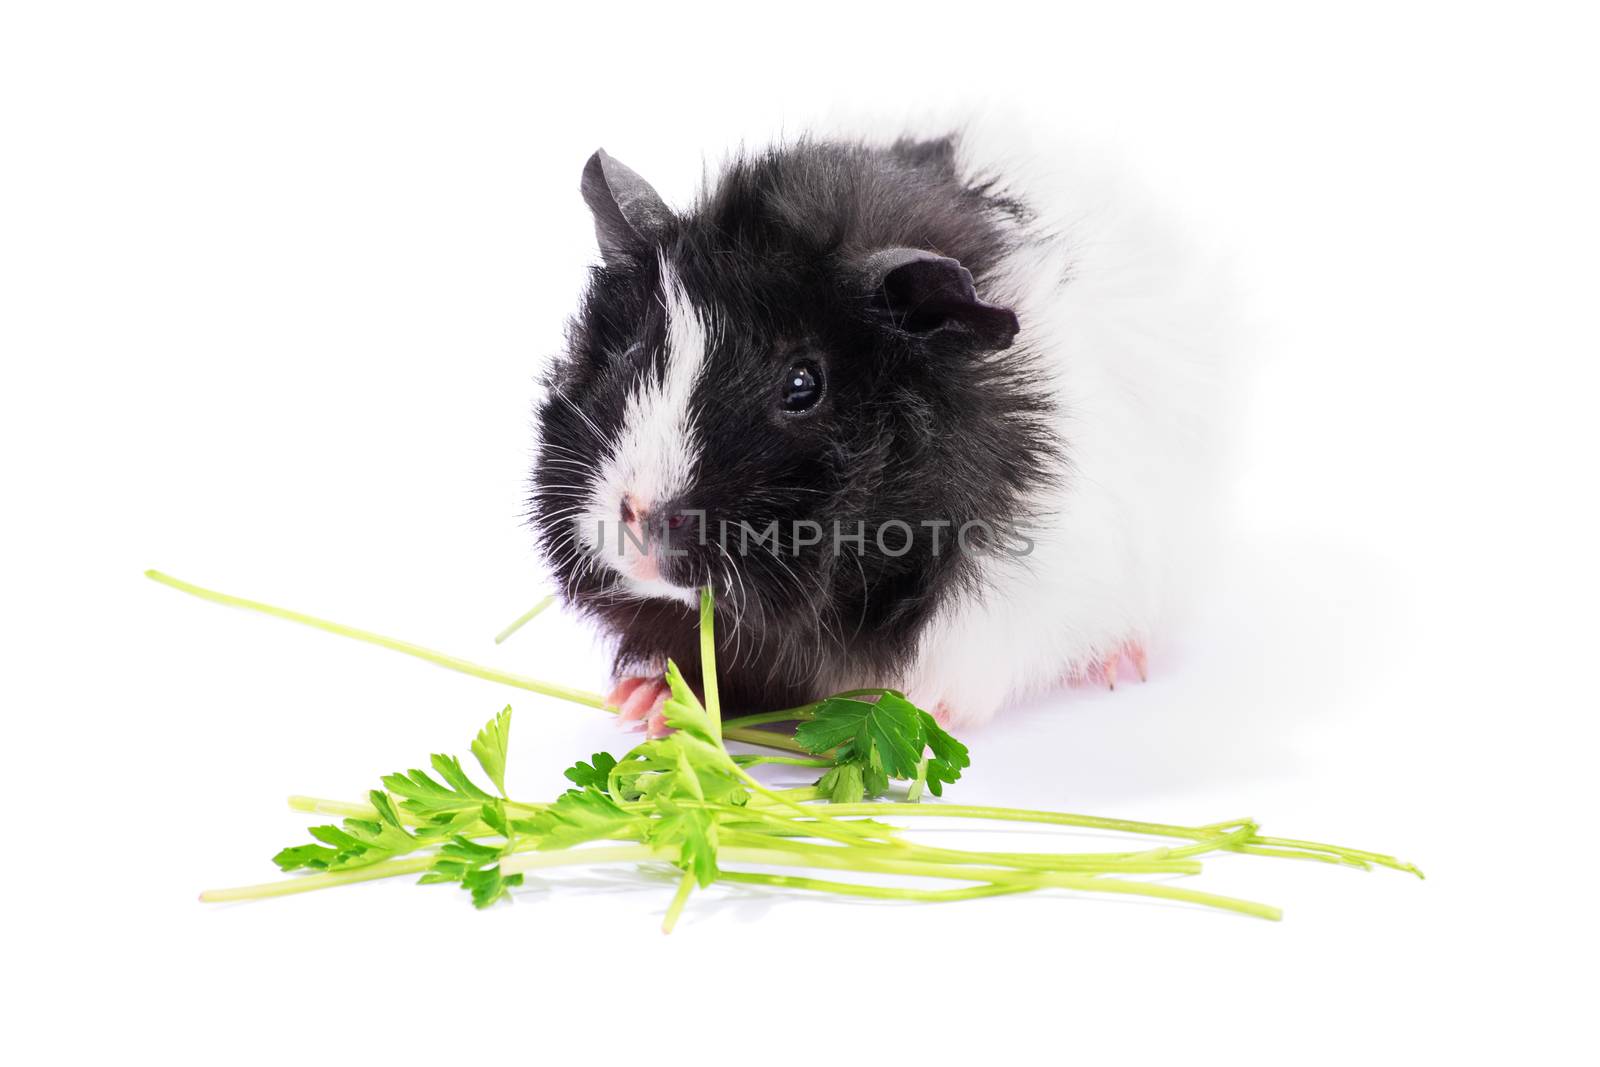 Cute black and white guinea pig eating parsley by Mendelex